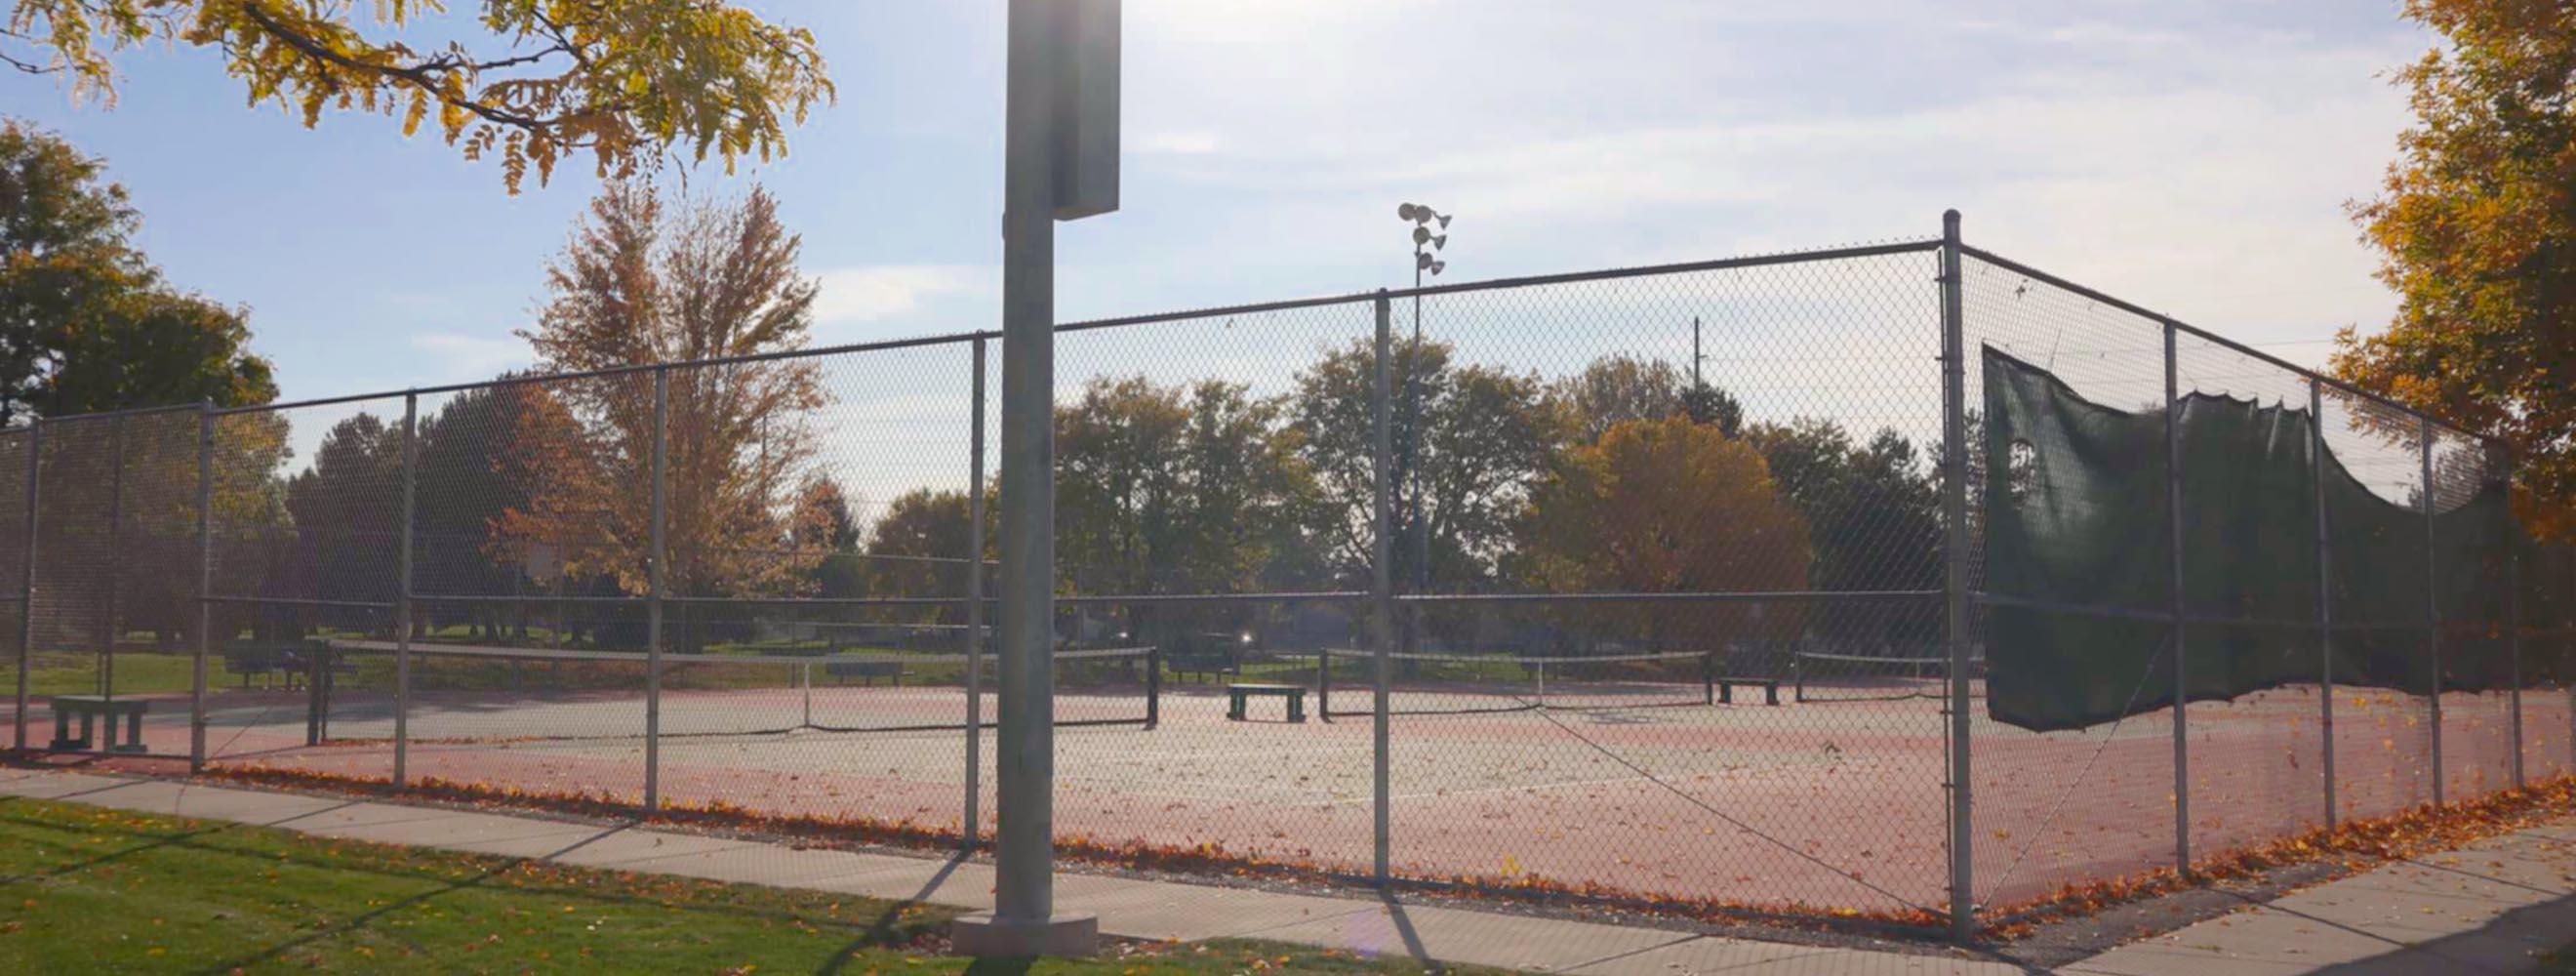 Tennis Courts with multiple playing courts surrounded chain link fences